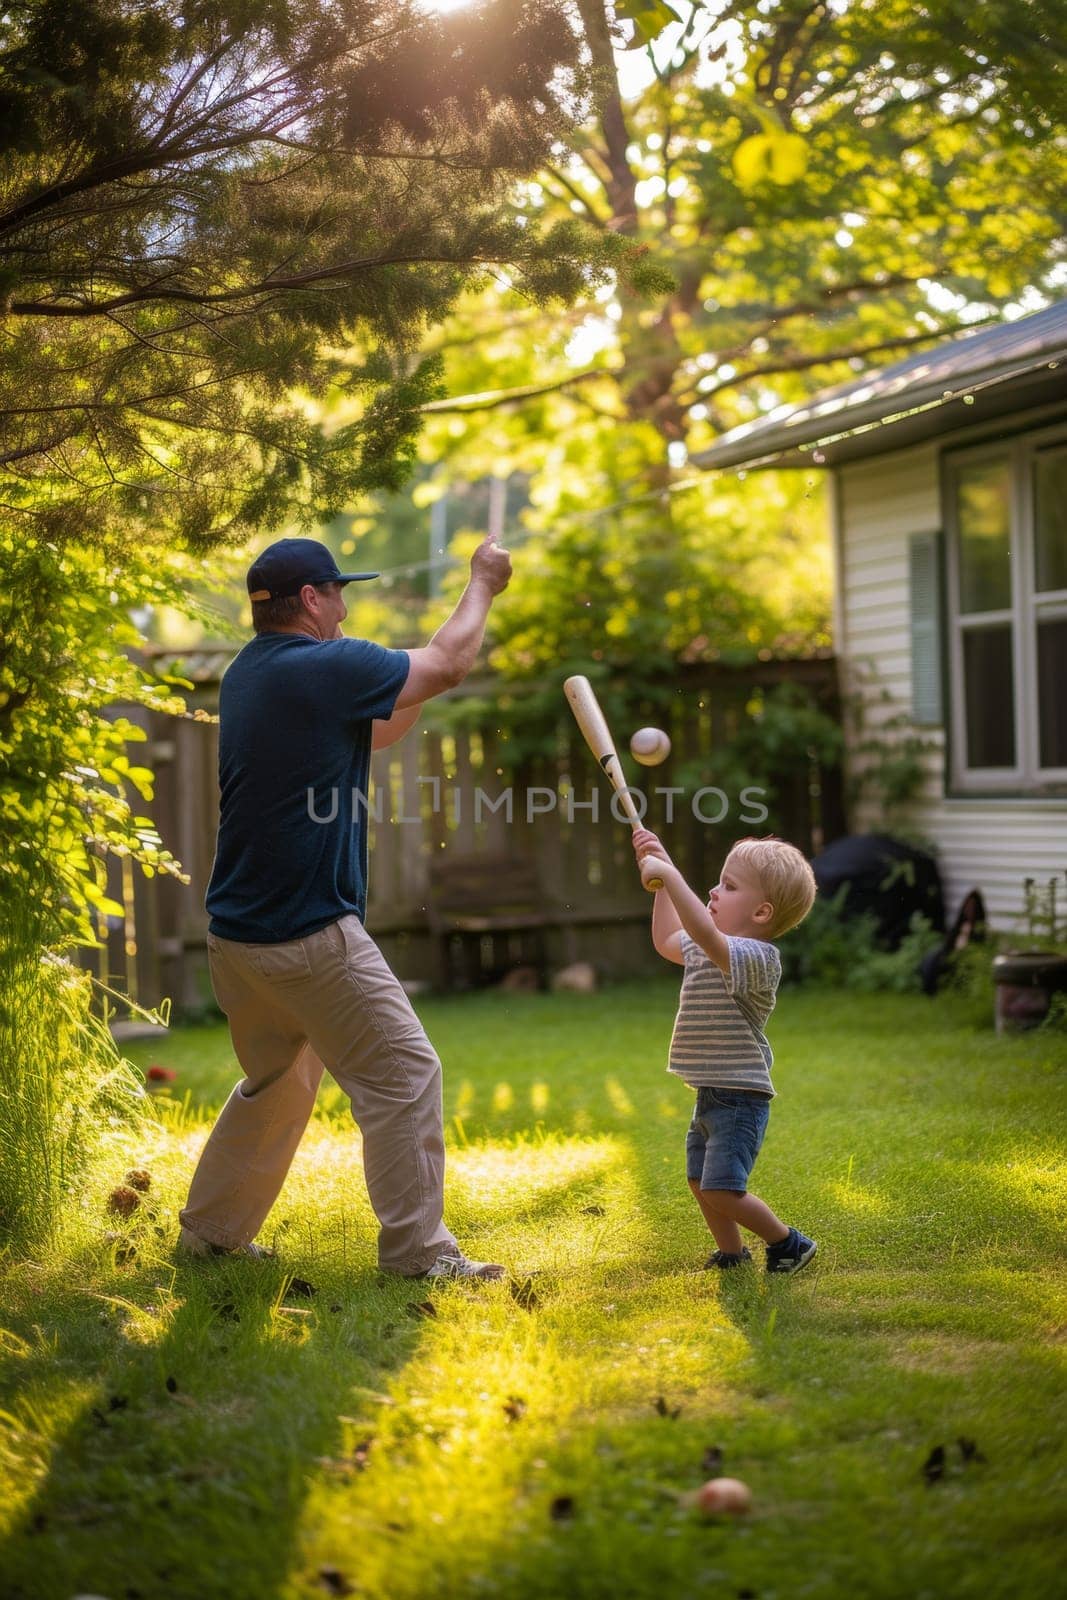 Man and child playing baseball in a backyard at sunset, with the sun casting long shadows